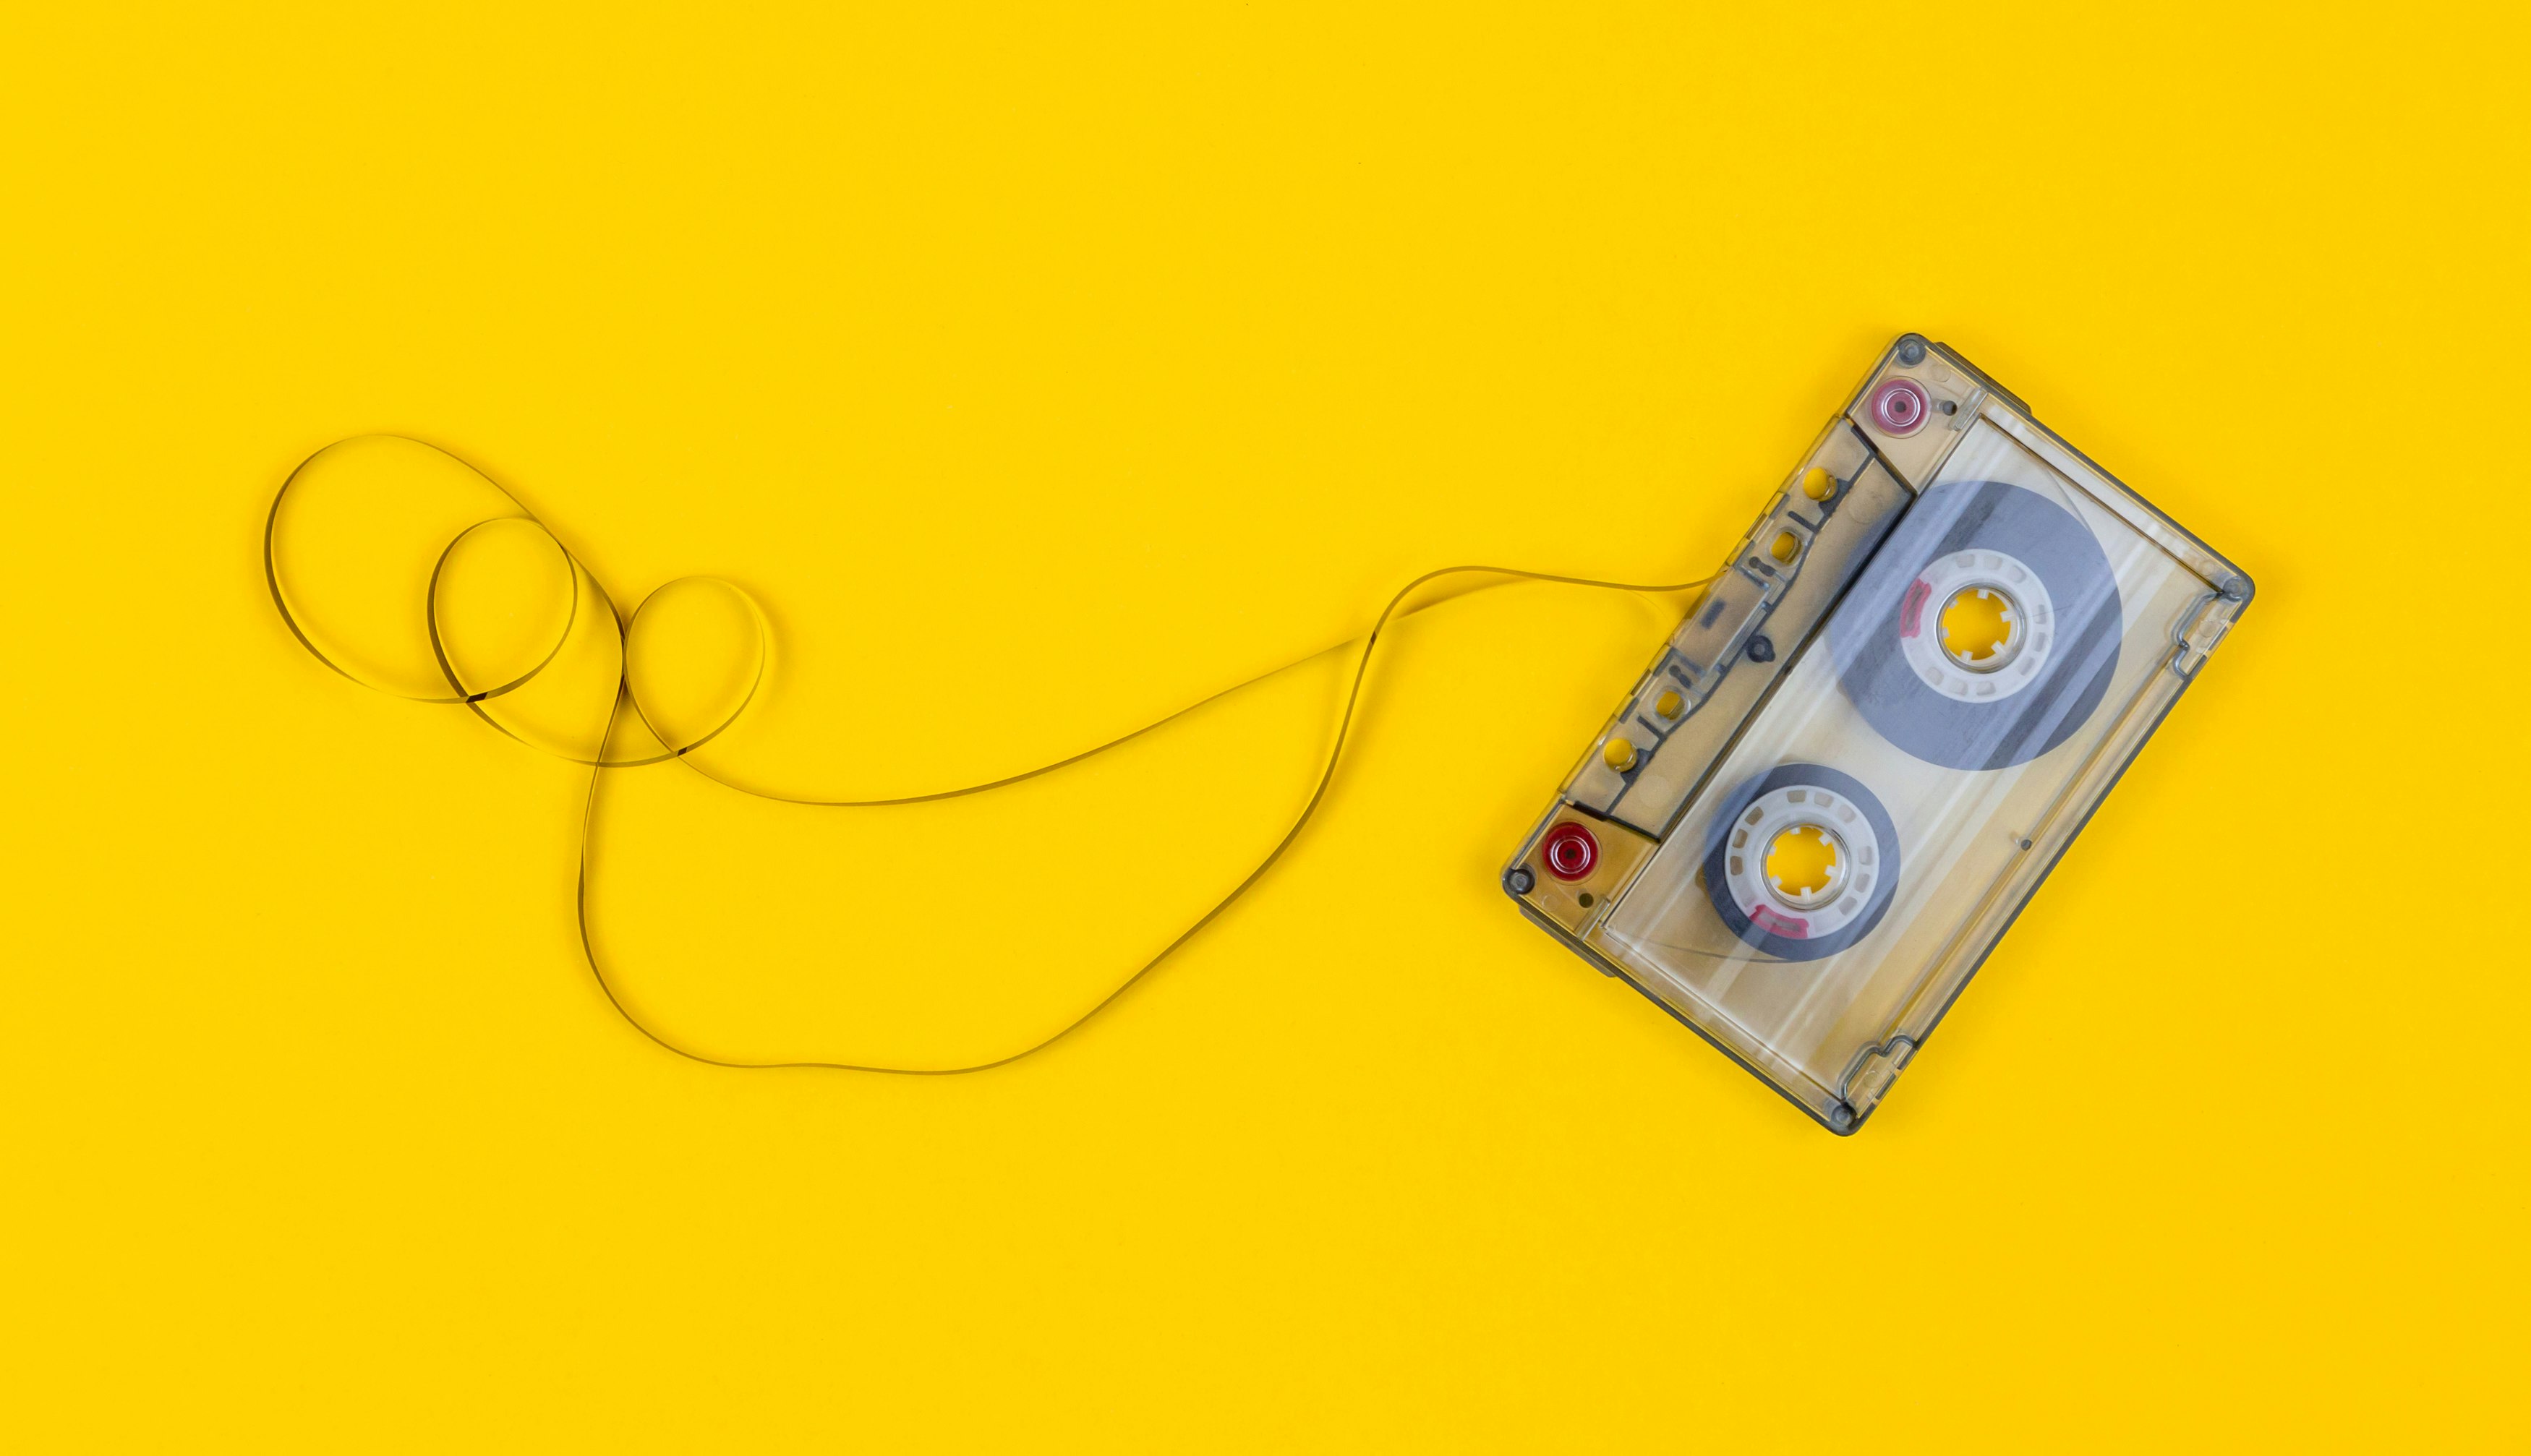 Top view of audio cassette with tangled tape on bright yellow background with copy space, minimalistic composition